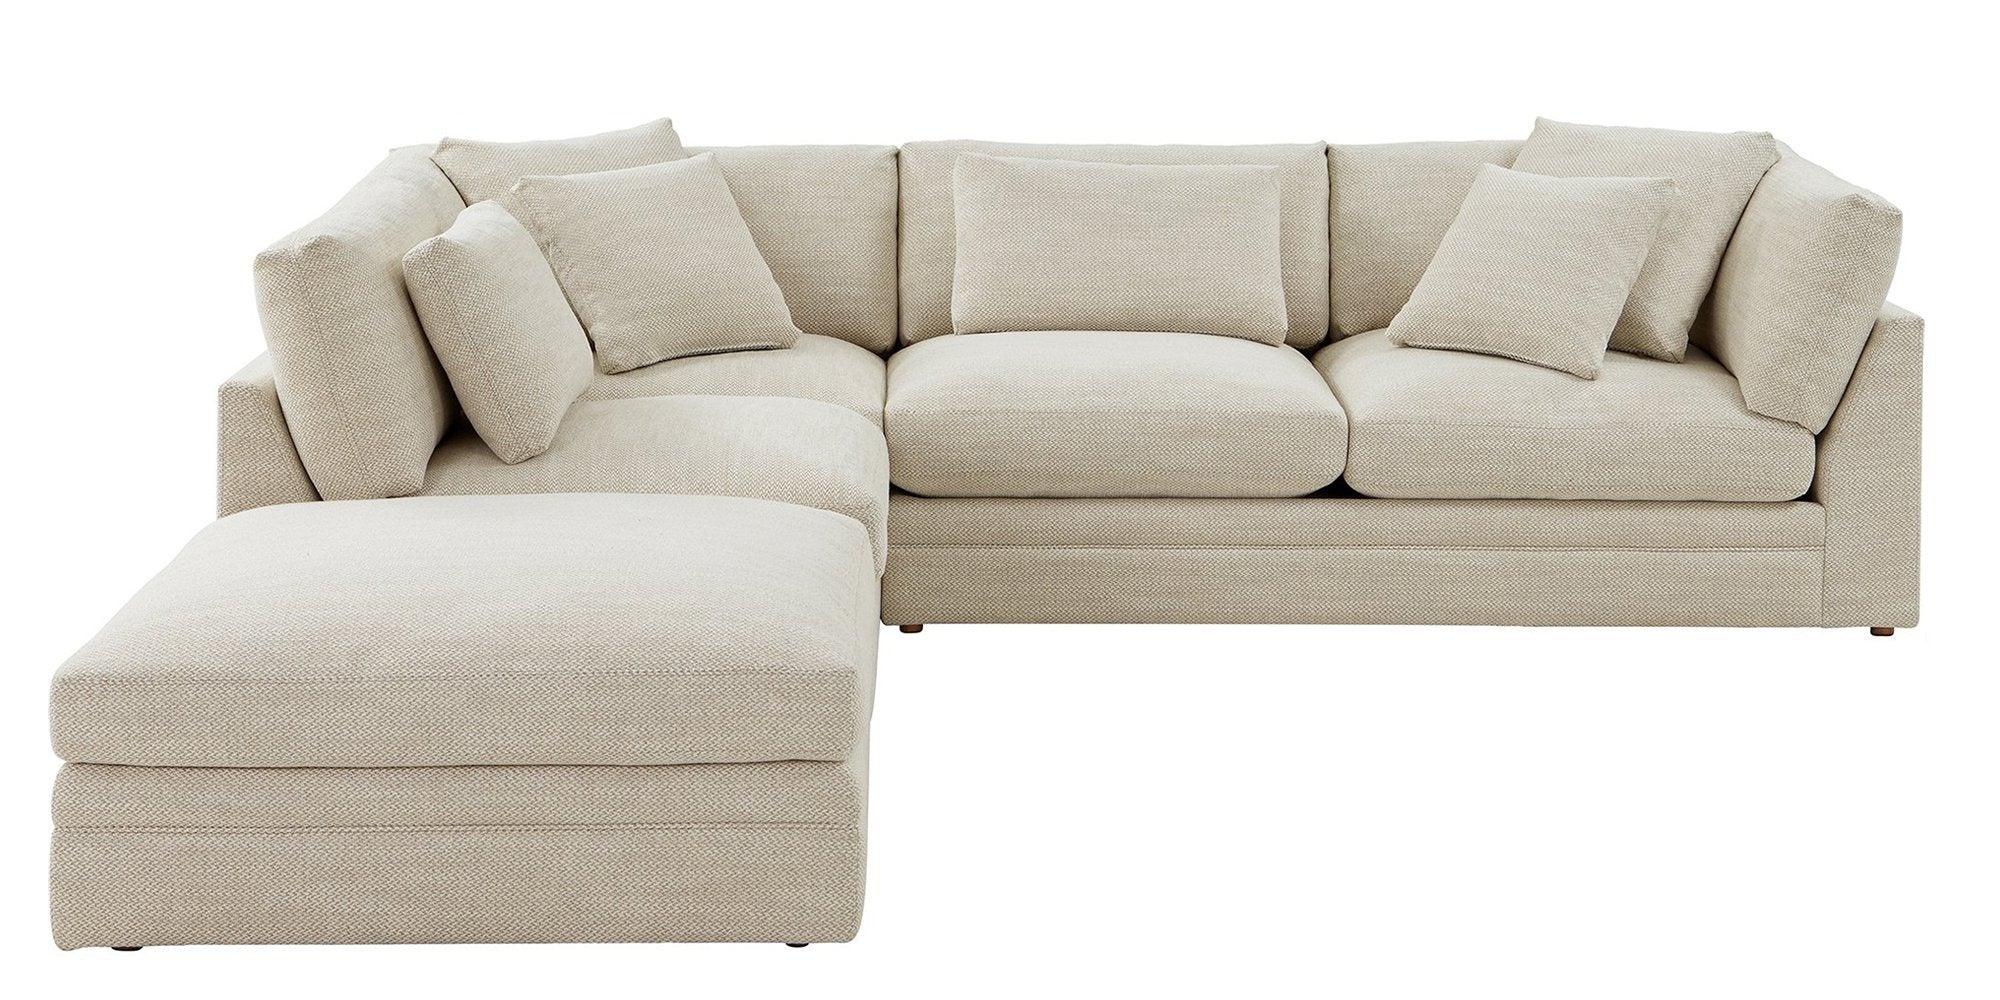 Feel Good Sectional with Ottoman, Left, Oyster - Image 1